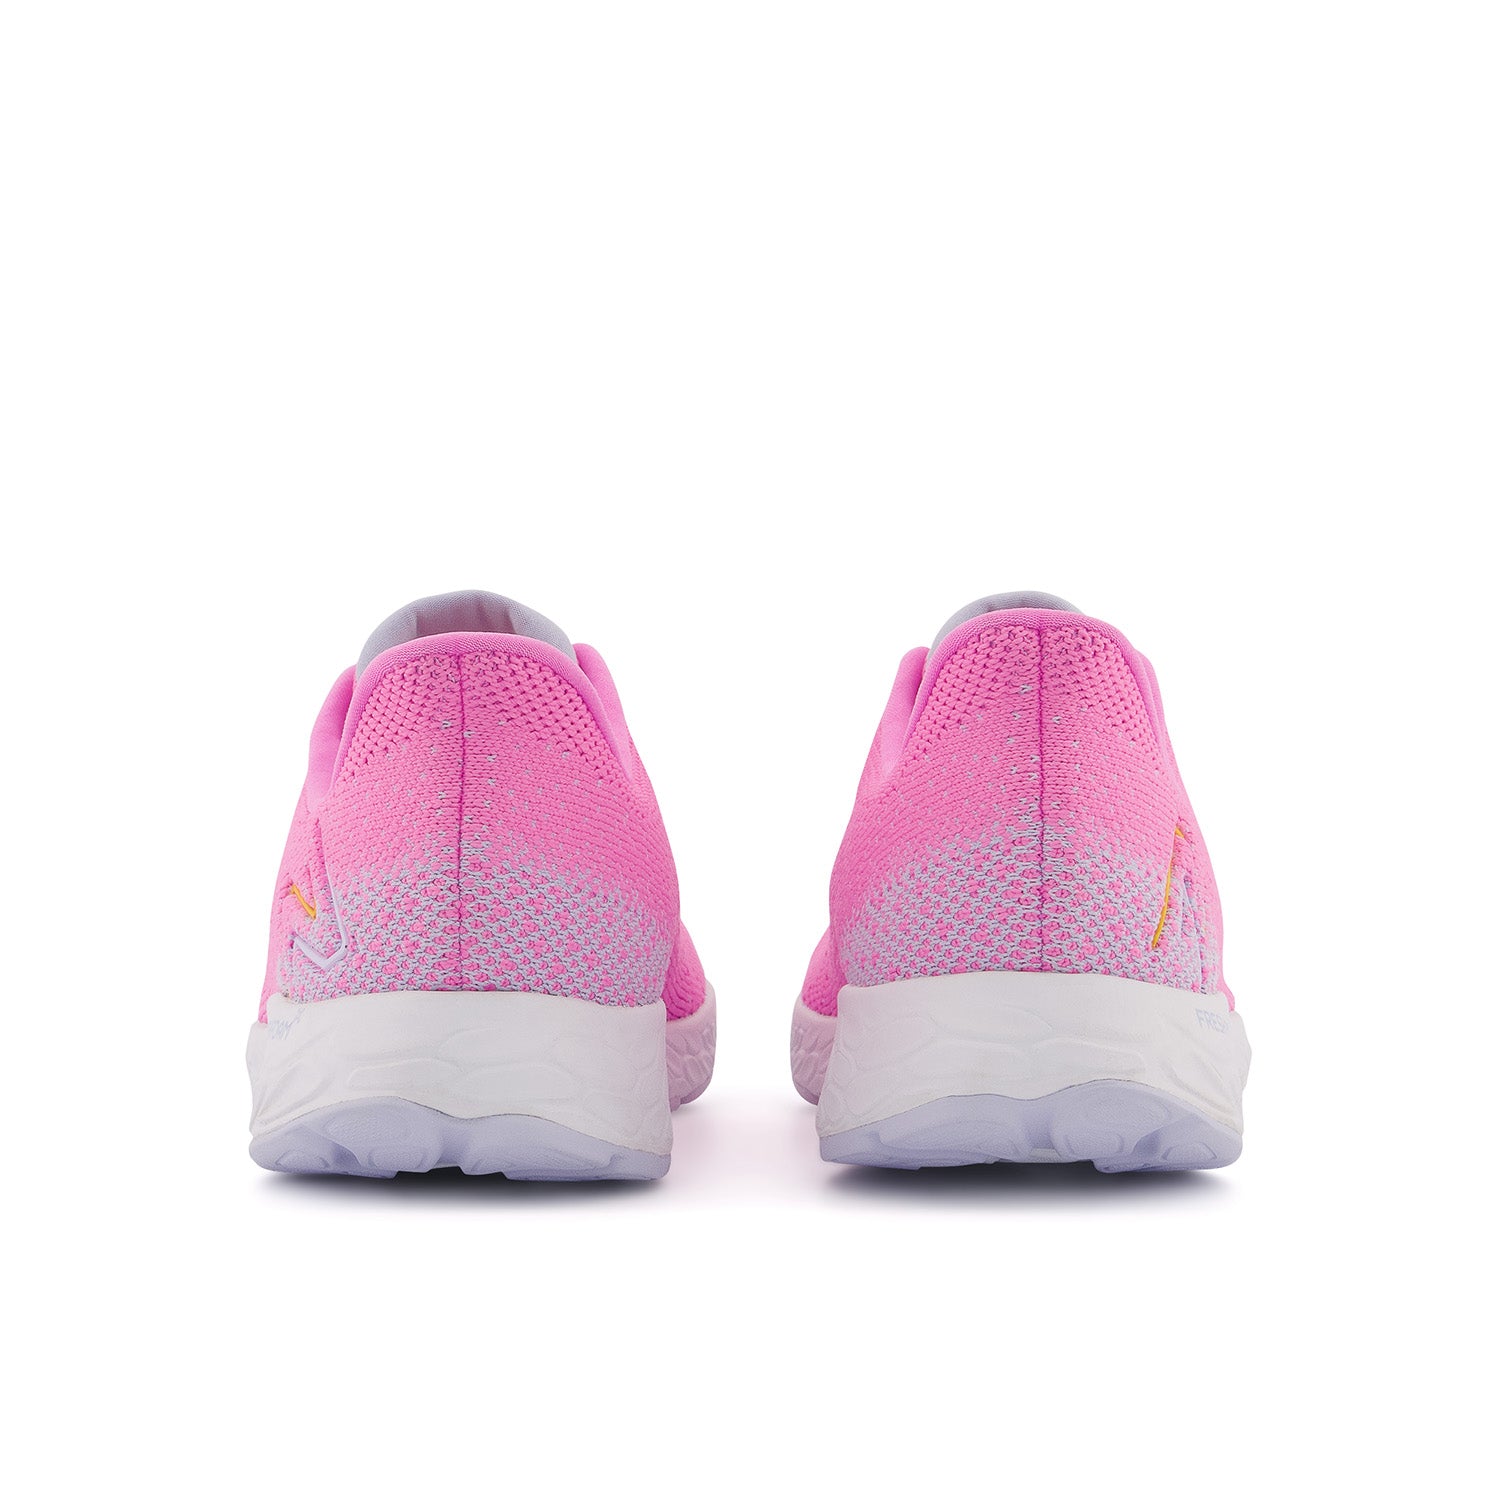 Women's New Balance Fresh Foam X Tempo v2 Color: Pink with White